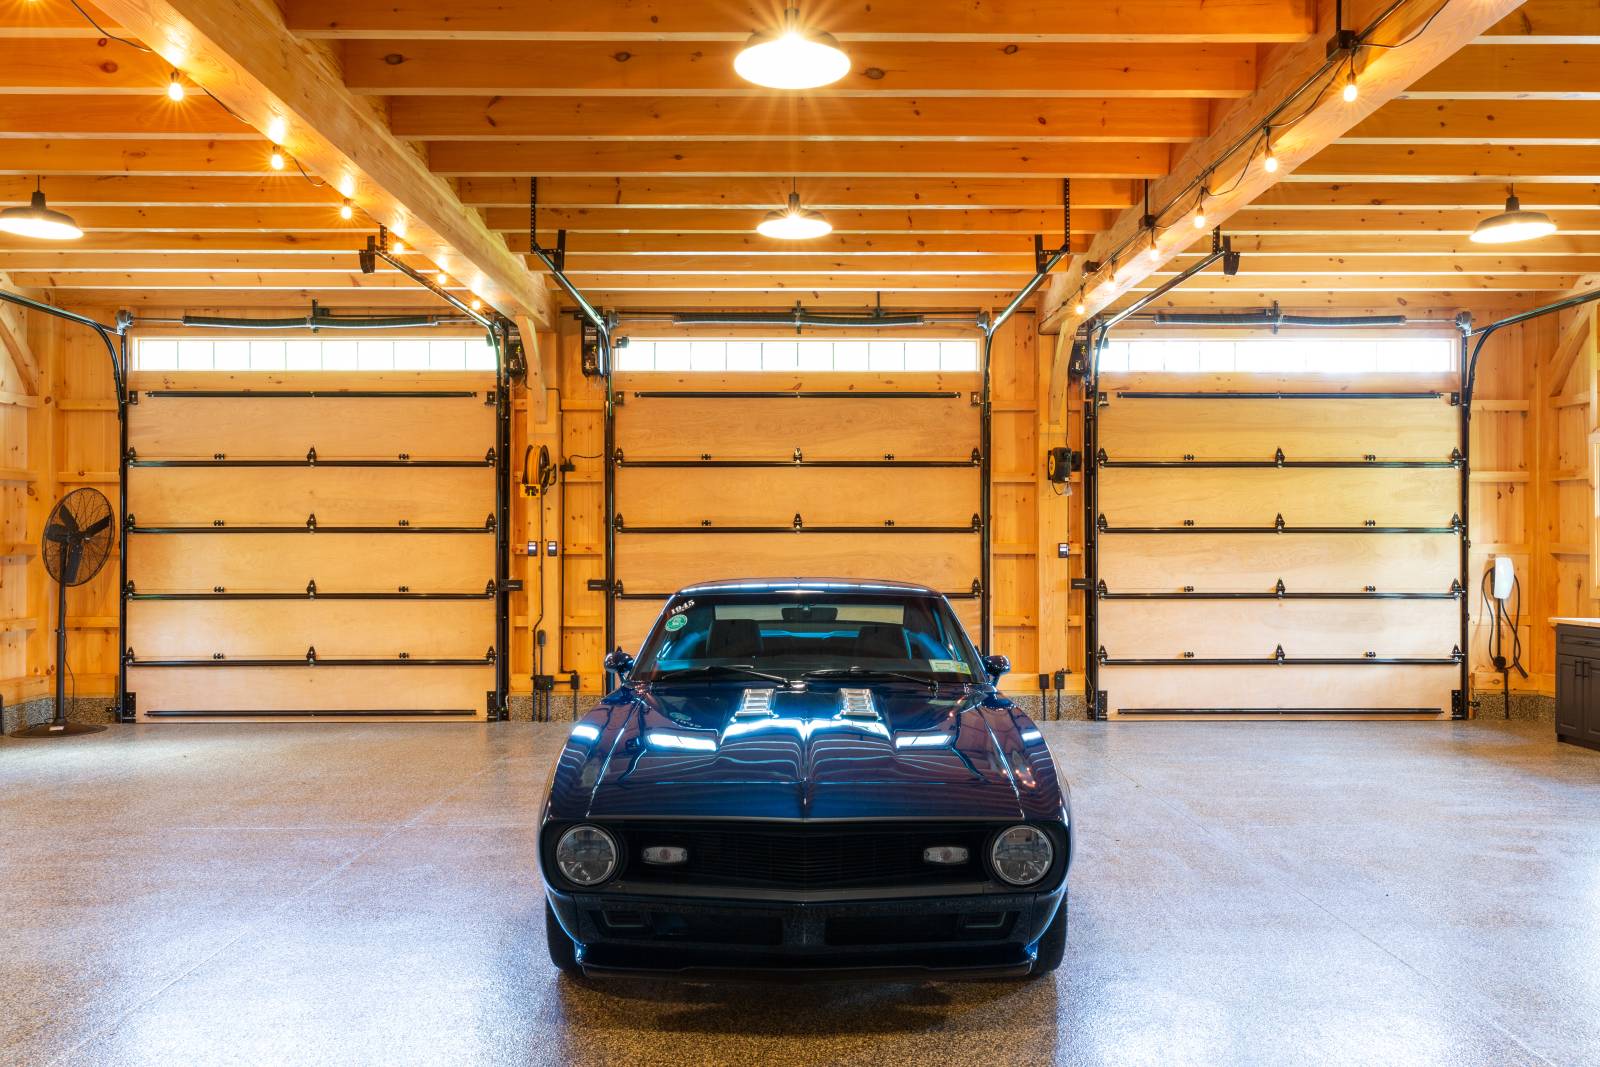 Custom Muscle Car Garages - Build Your Own Garage